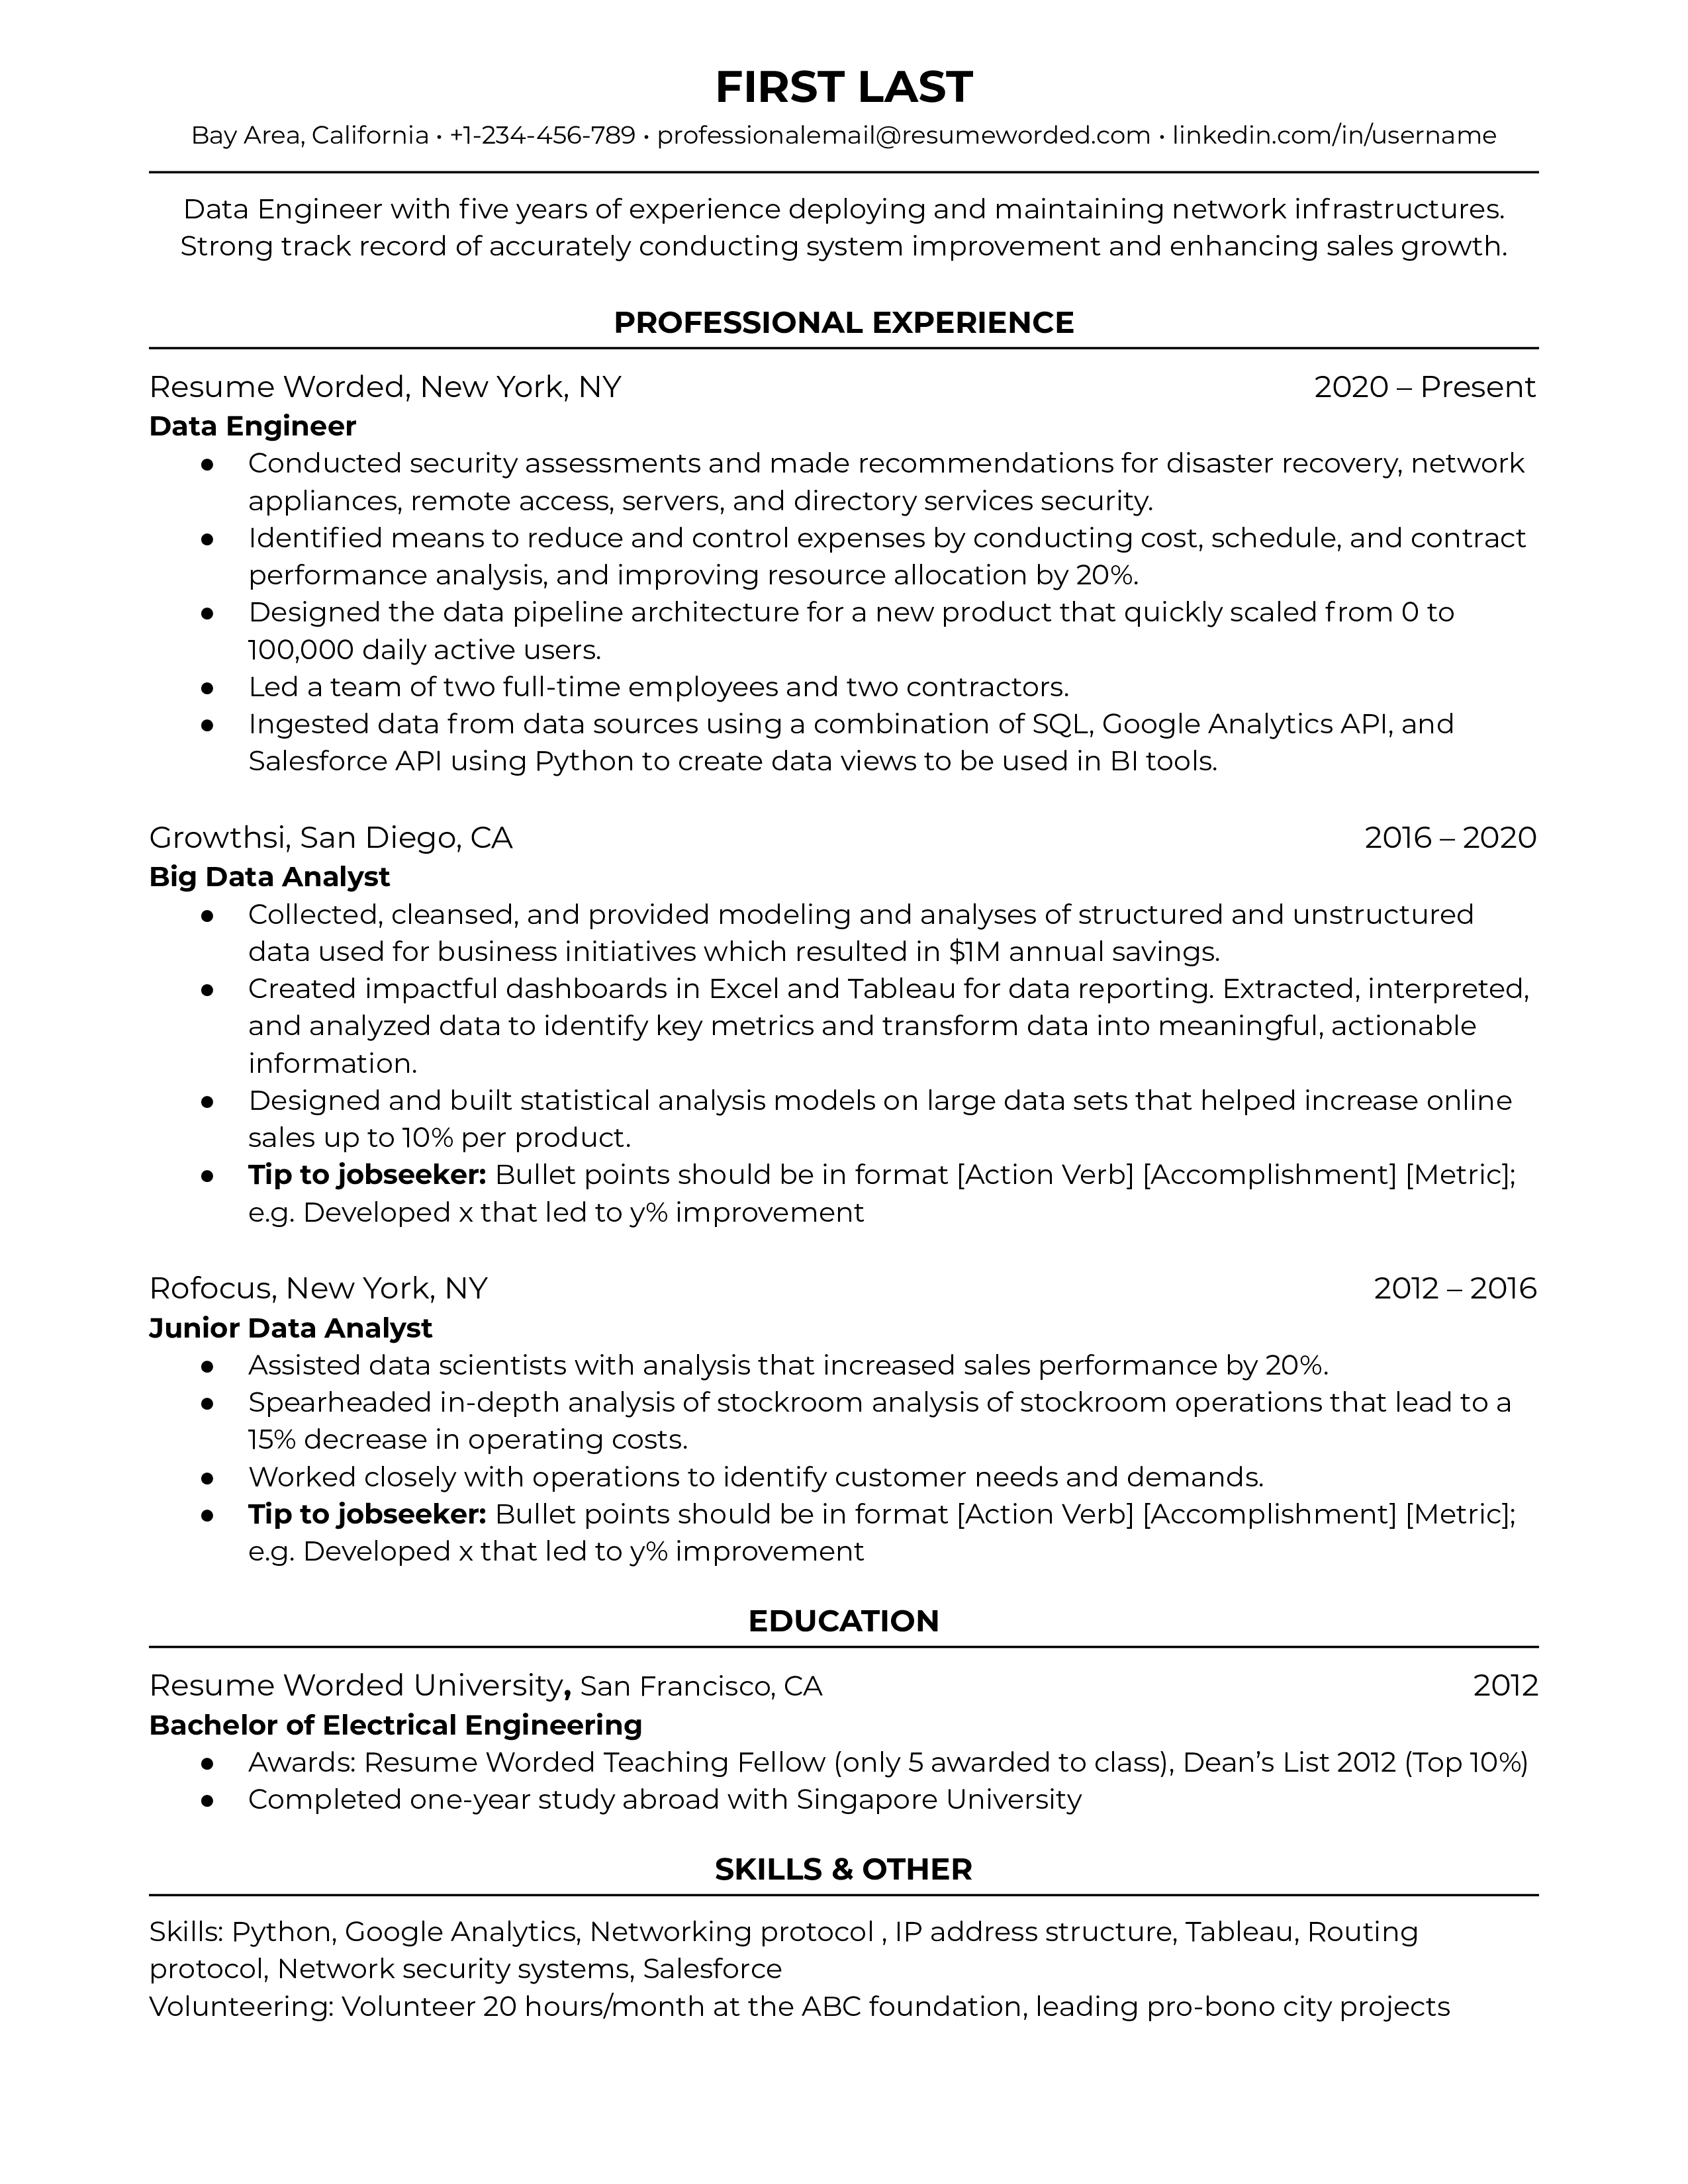 Data Engineer CV featuring technical skills and problem-solving experiences.